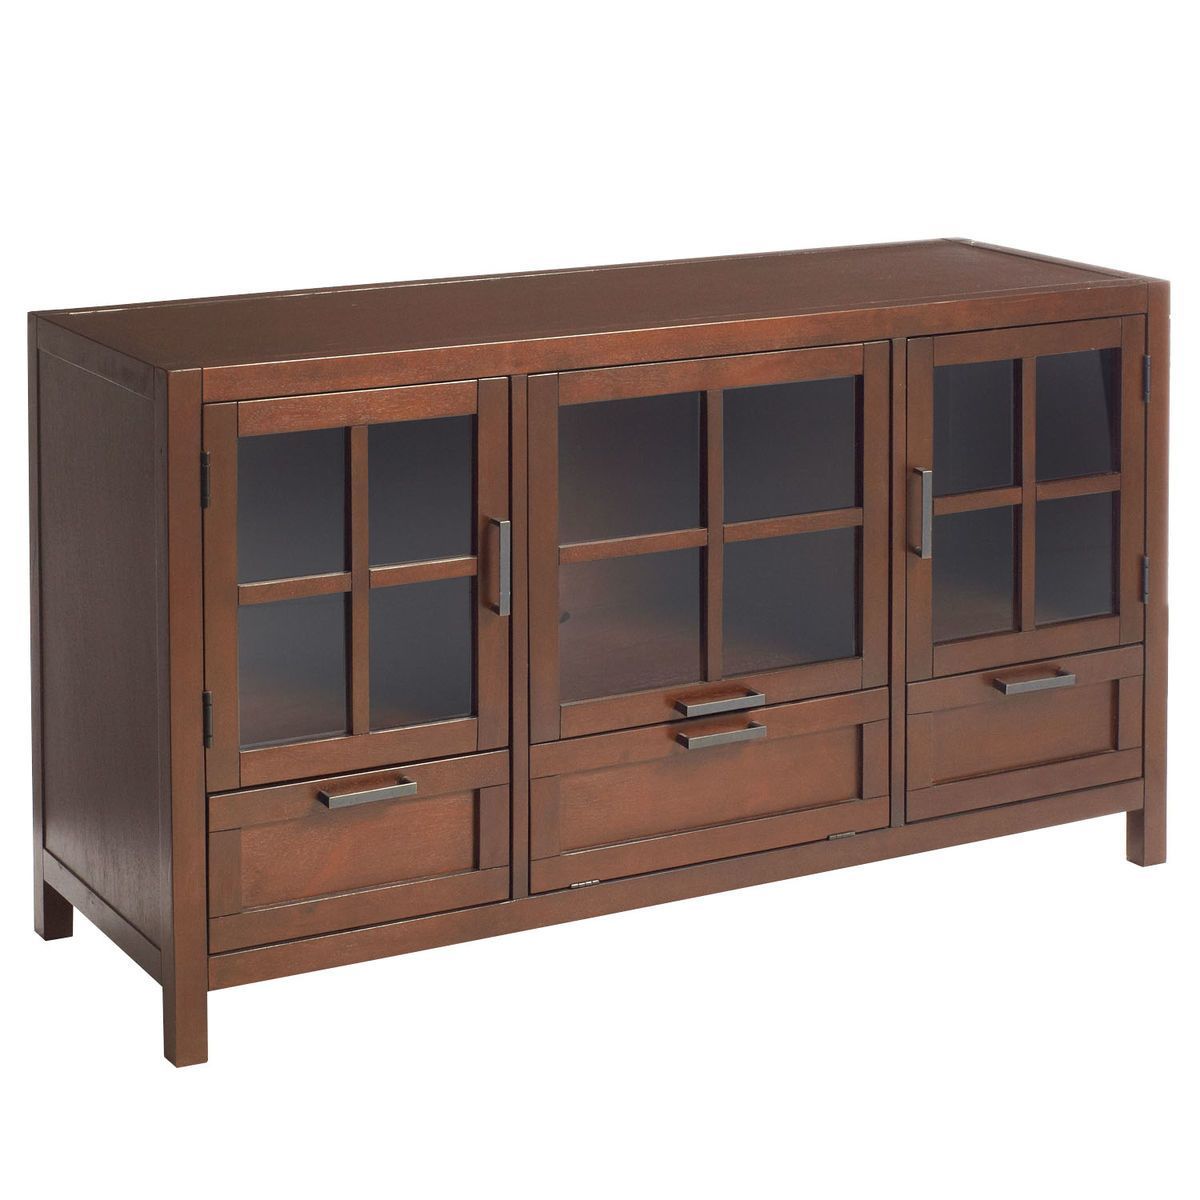 Sausalito Mahogany Brown Modular 52" Tv Stand | Pier 1 Intended For Modular Tv Stands Furniture (View 3 of 15)